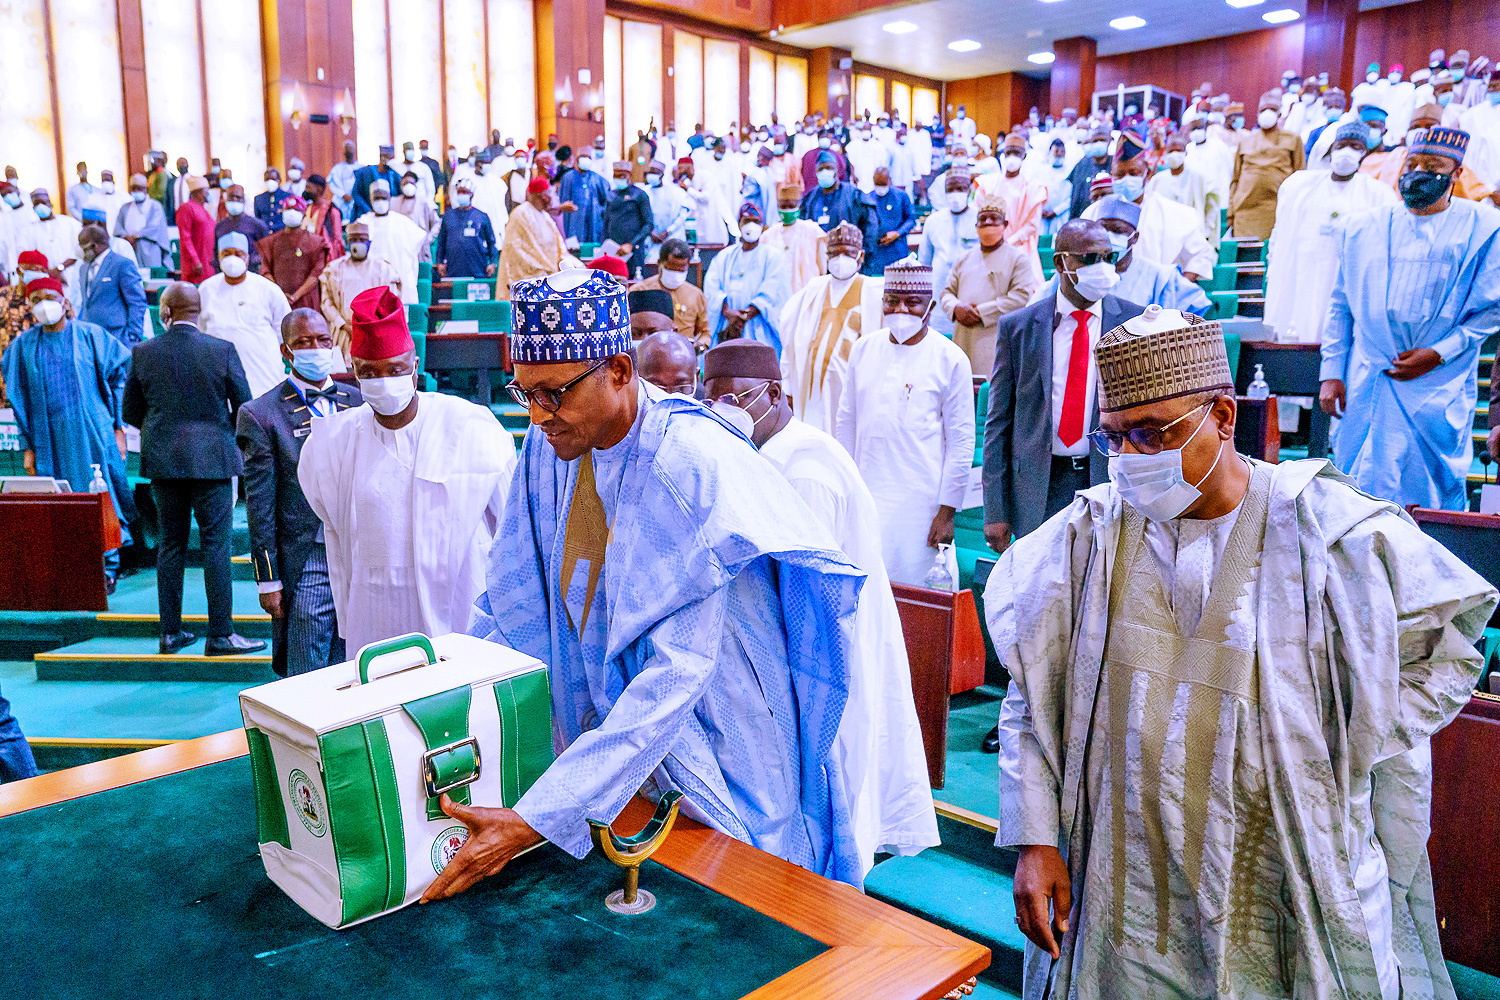 The photo shows the president placing a smart white-and-green portfolio case on a table at the front of a large assembly hall filled with people. 